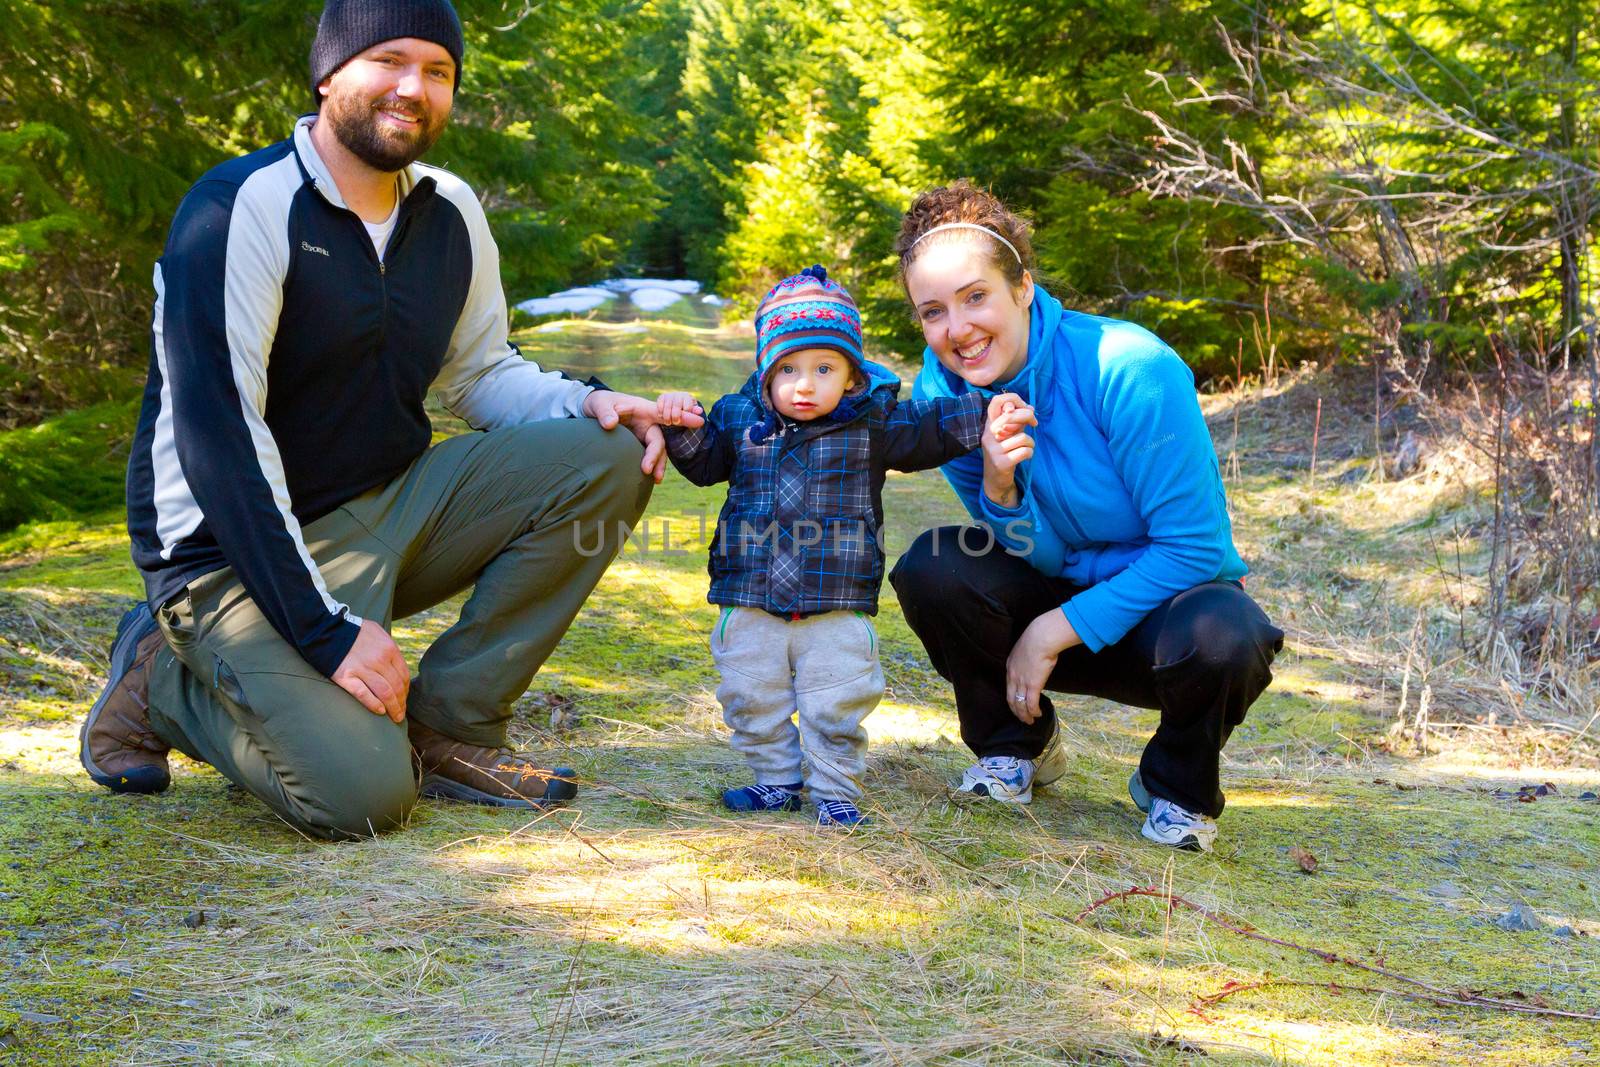 A family of three people stop for a moment to have some photos taken and pose for the camera while hiking in the Oregon wilderness during the spring time.